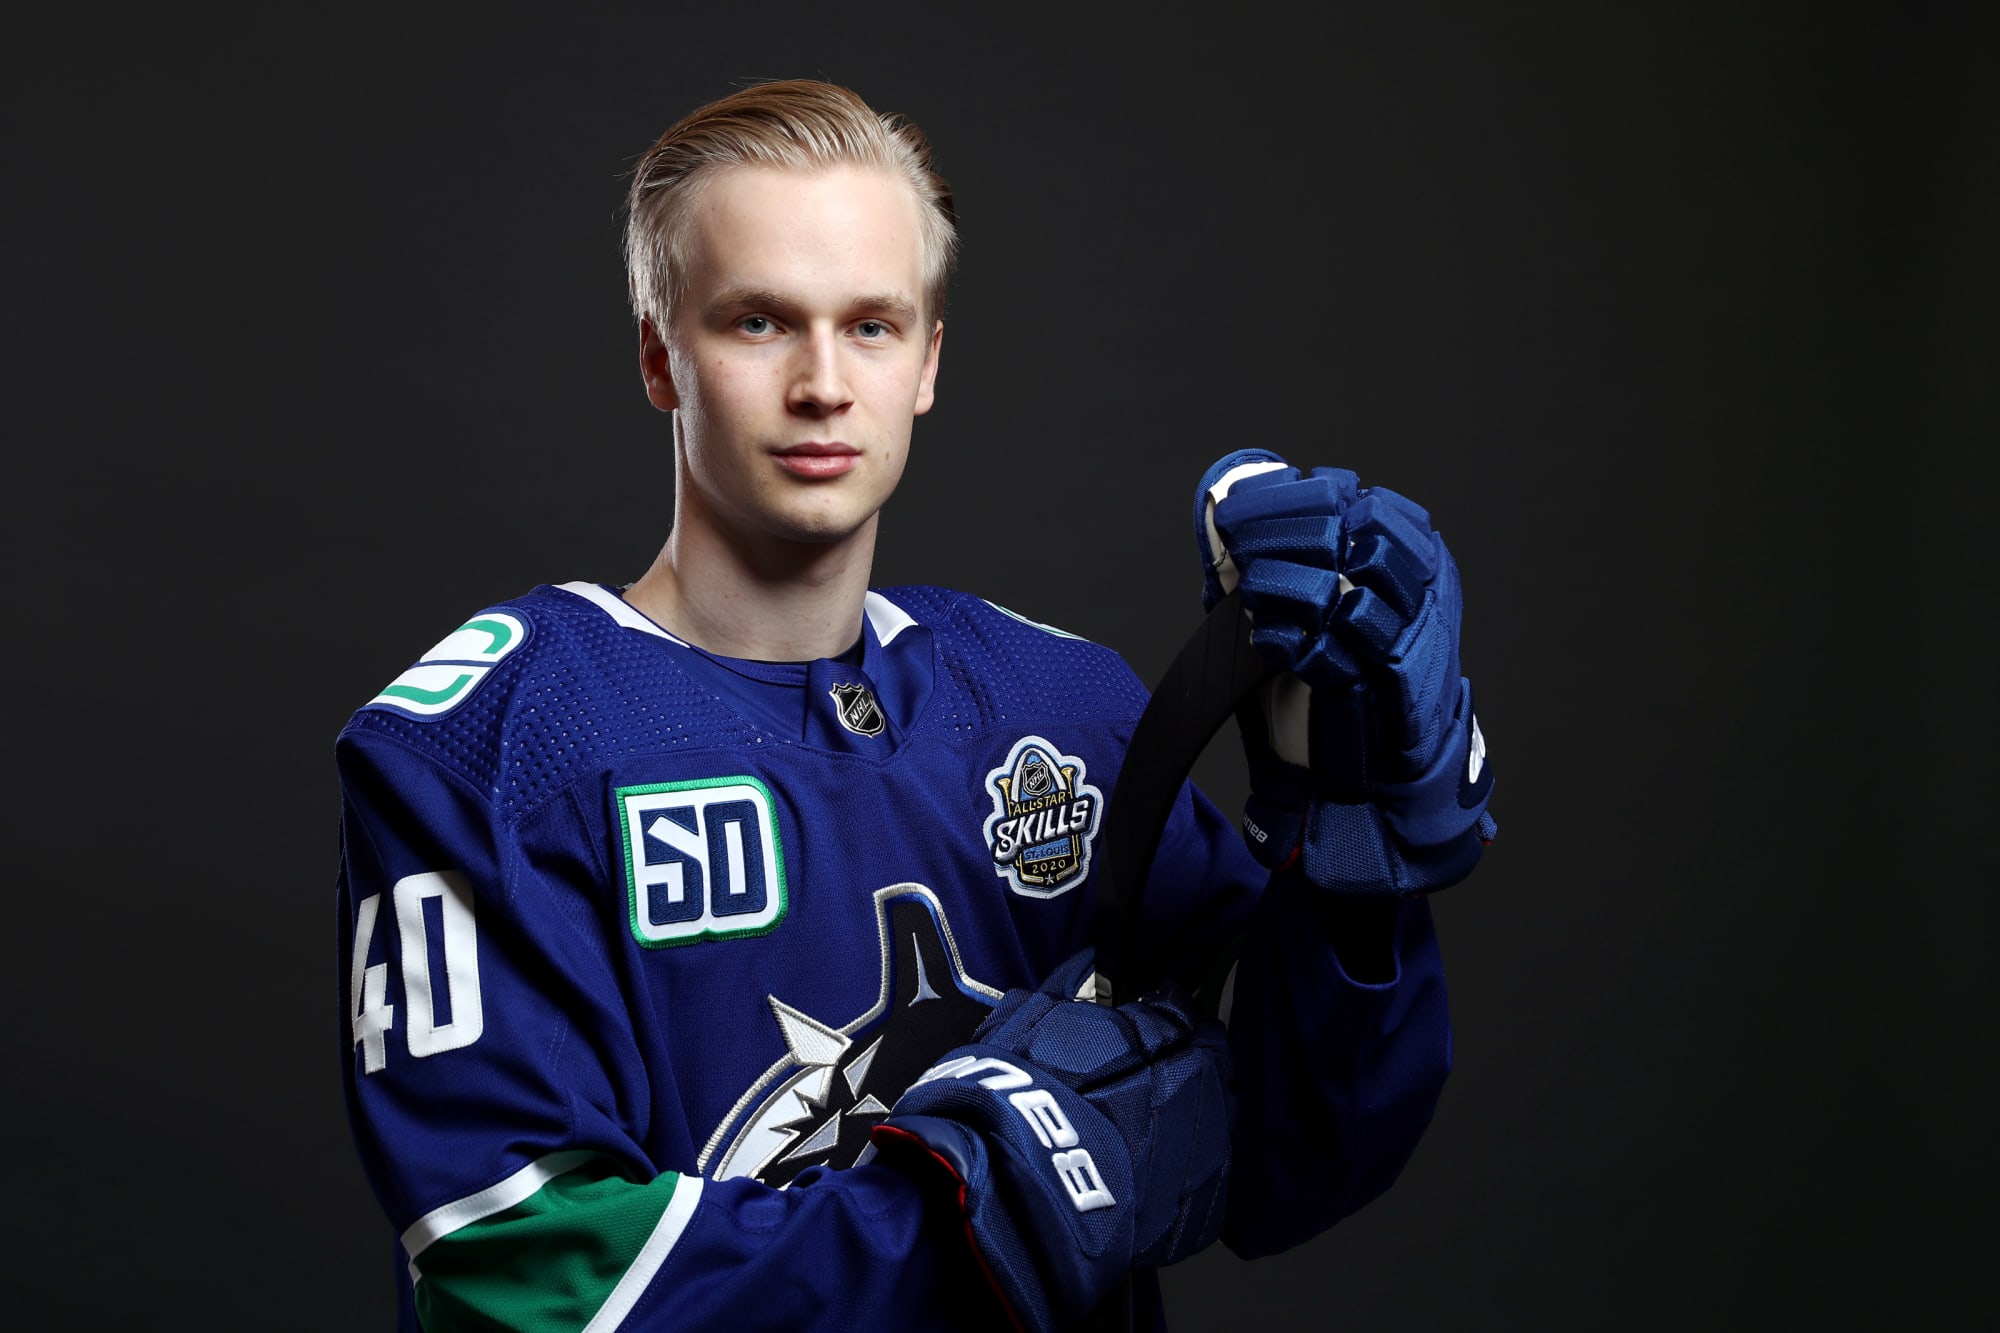 Elias Pettersson on his current RFA status and future with the